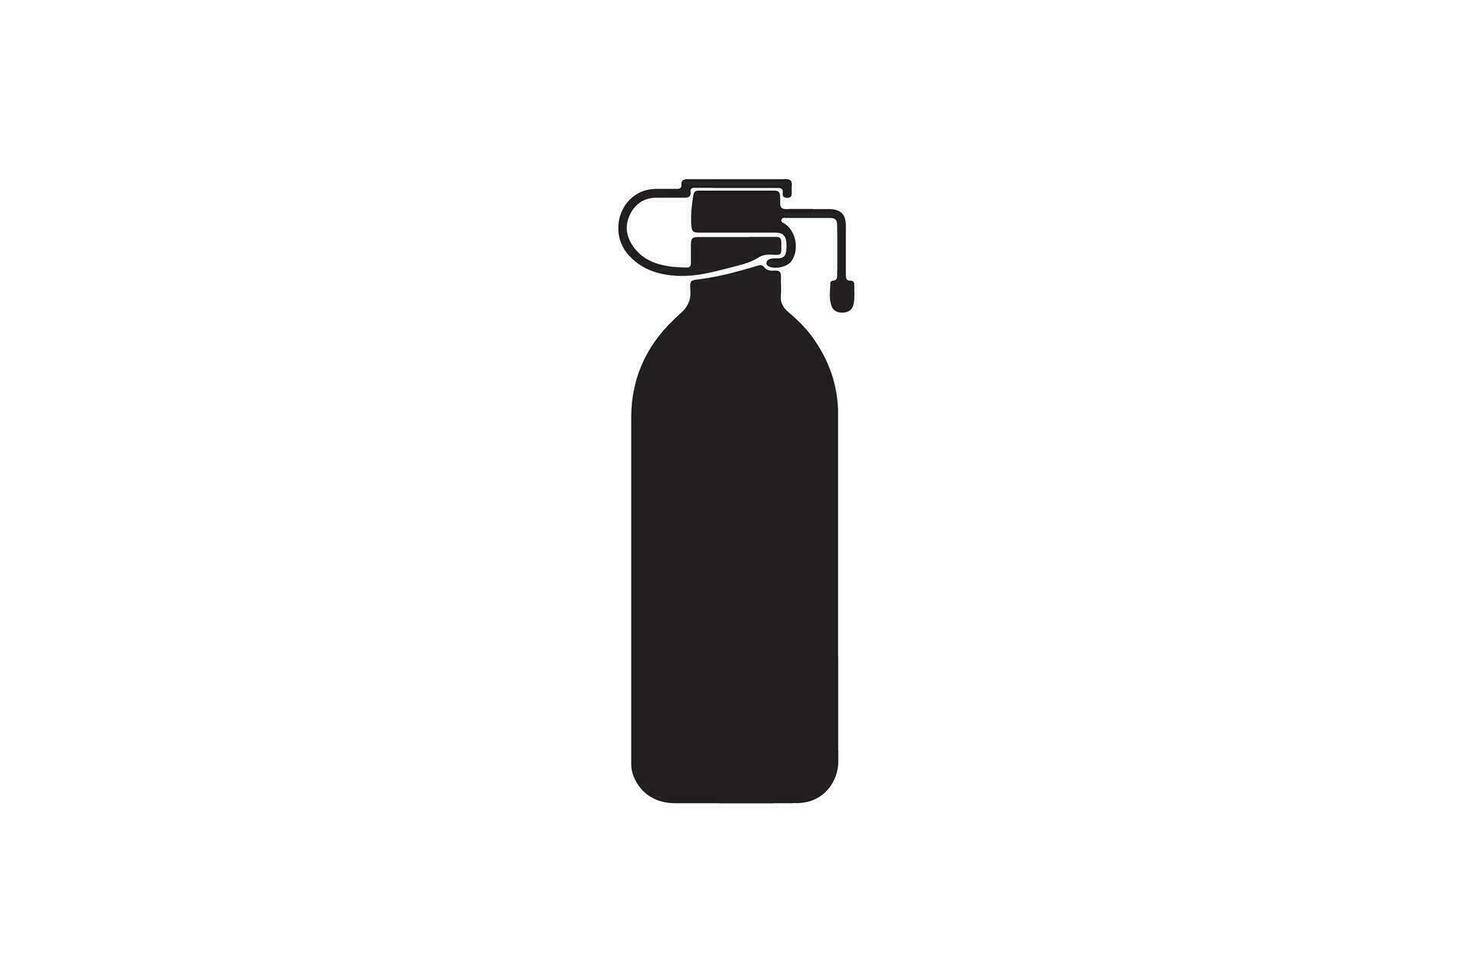 Water bottle silhouette black color in white background vector